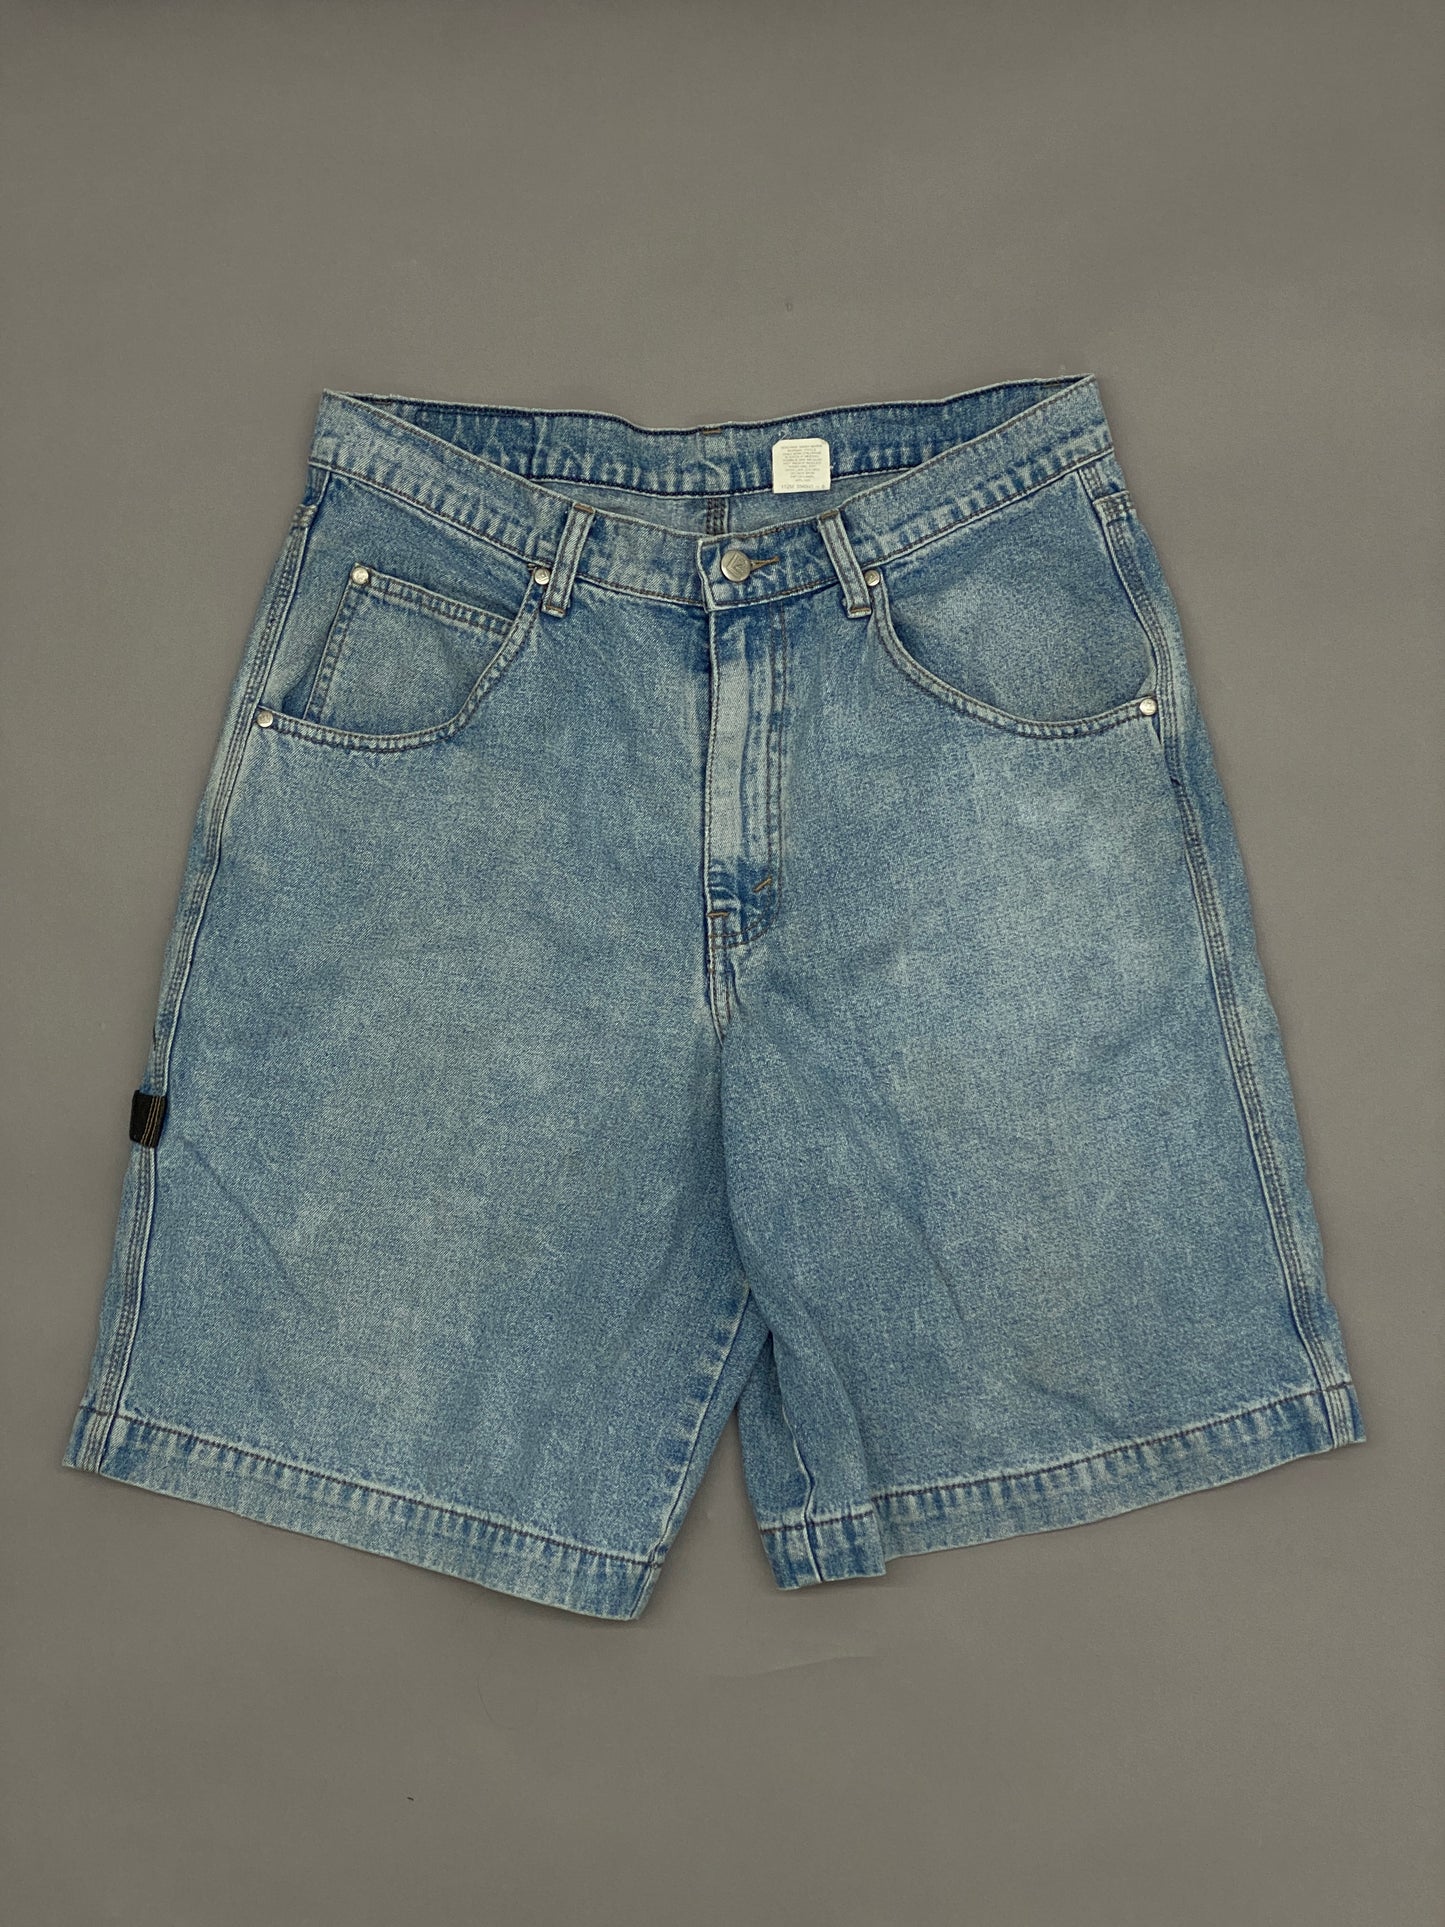 Shorts Baggy Levis Silver Tab Vintage - 32